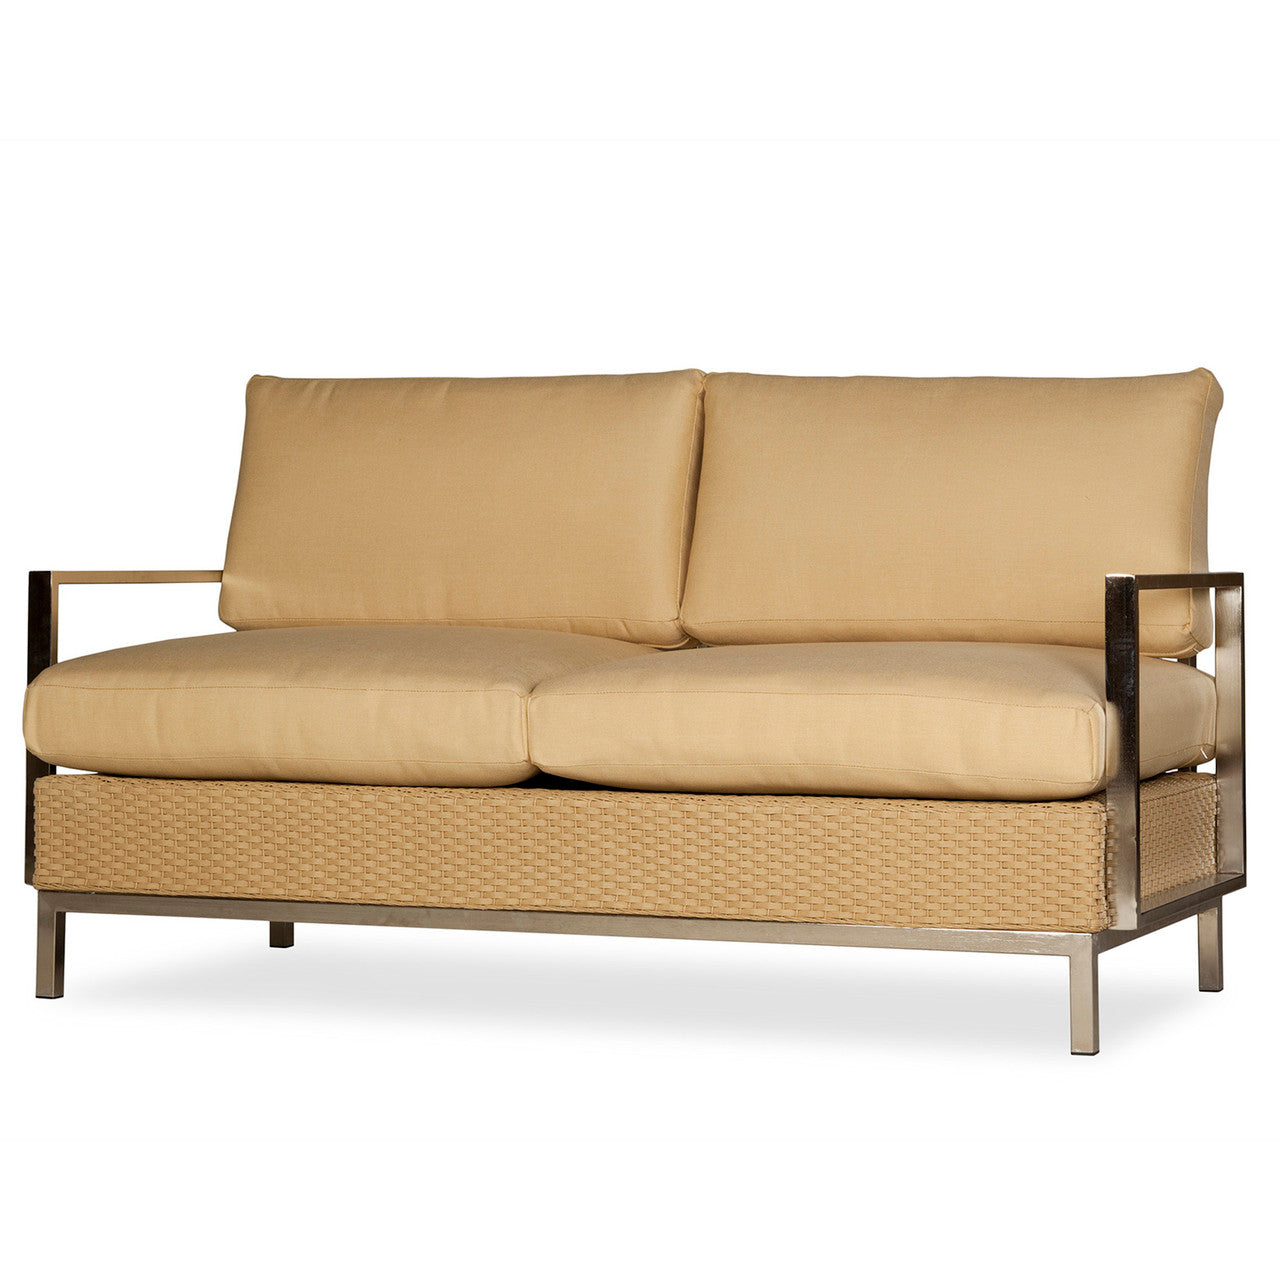 Lloyd Flanders Elements Wicker Settee With Stainless Steel Arm and Back